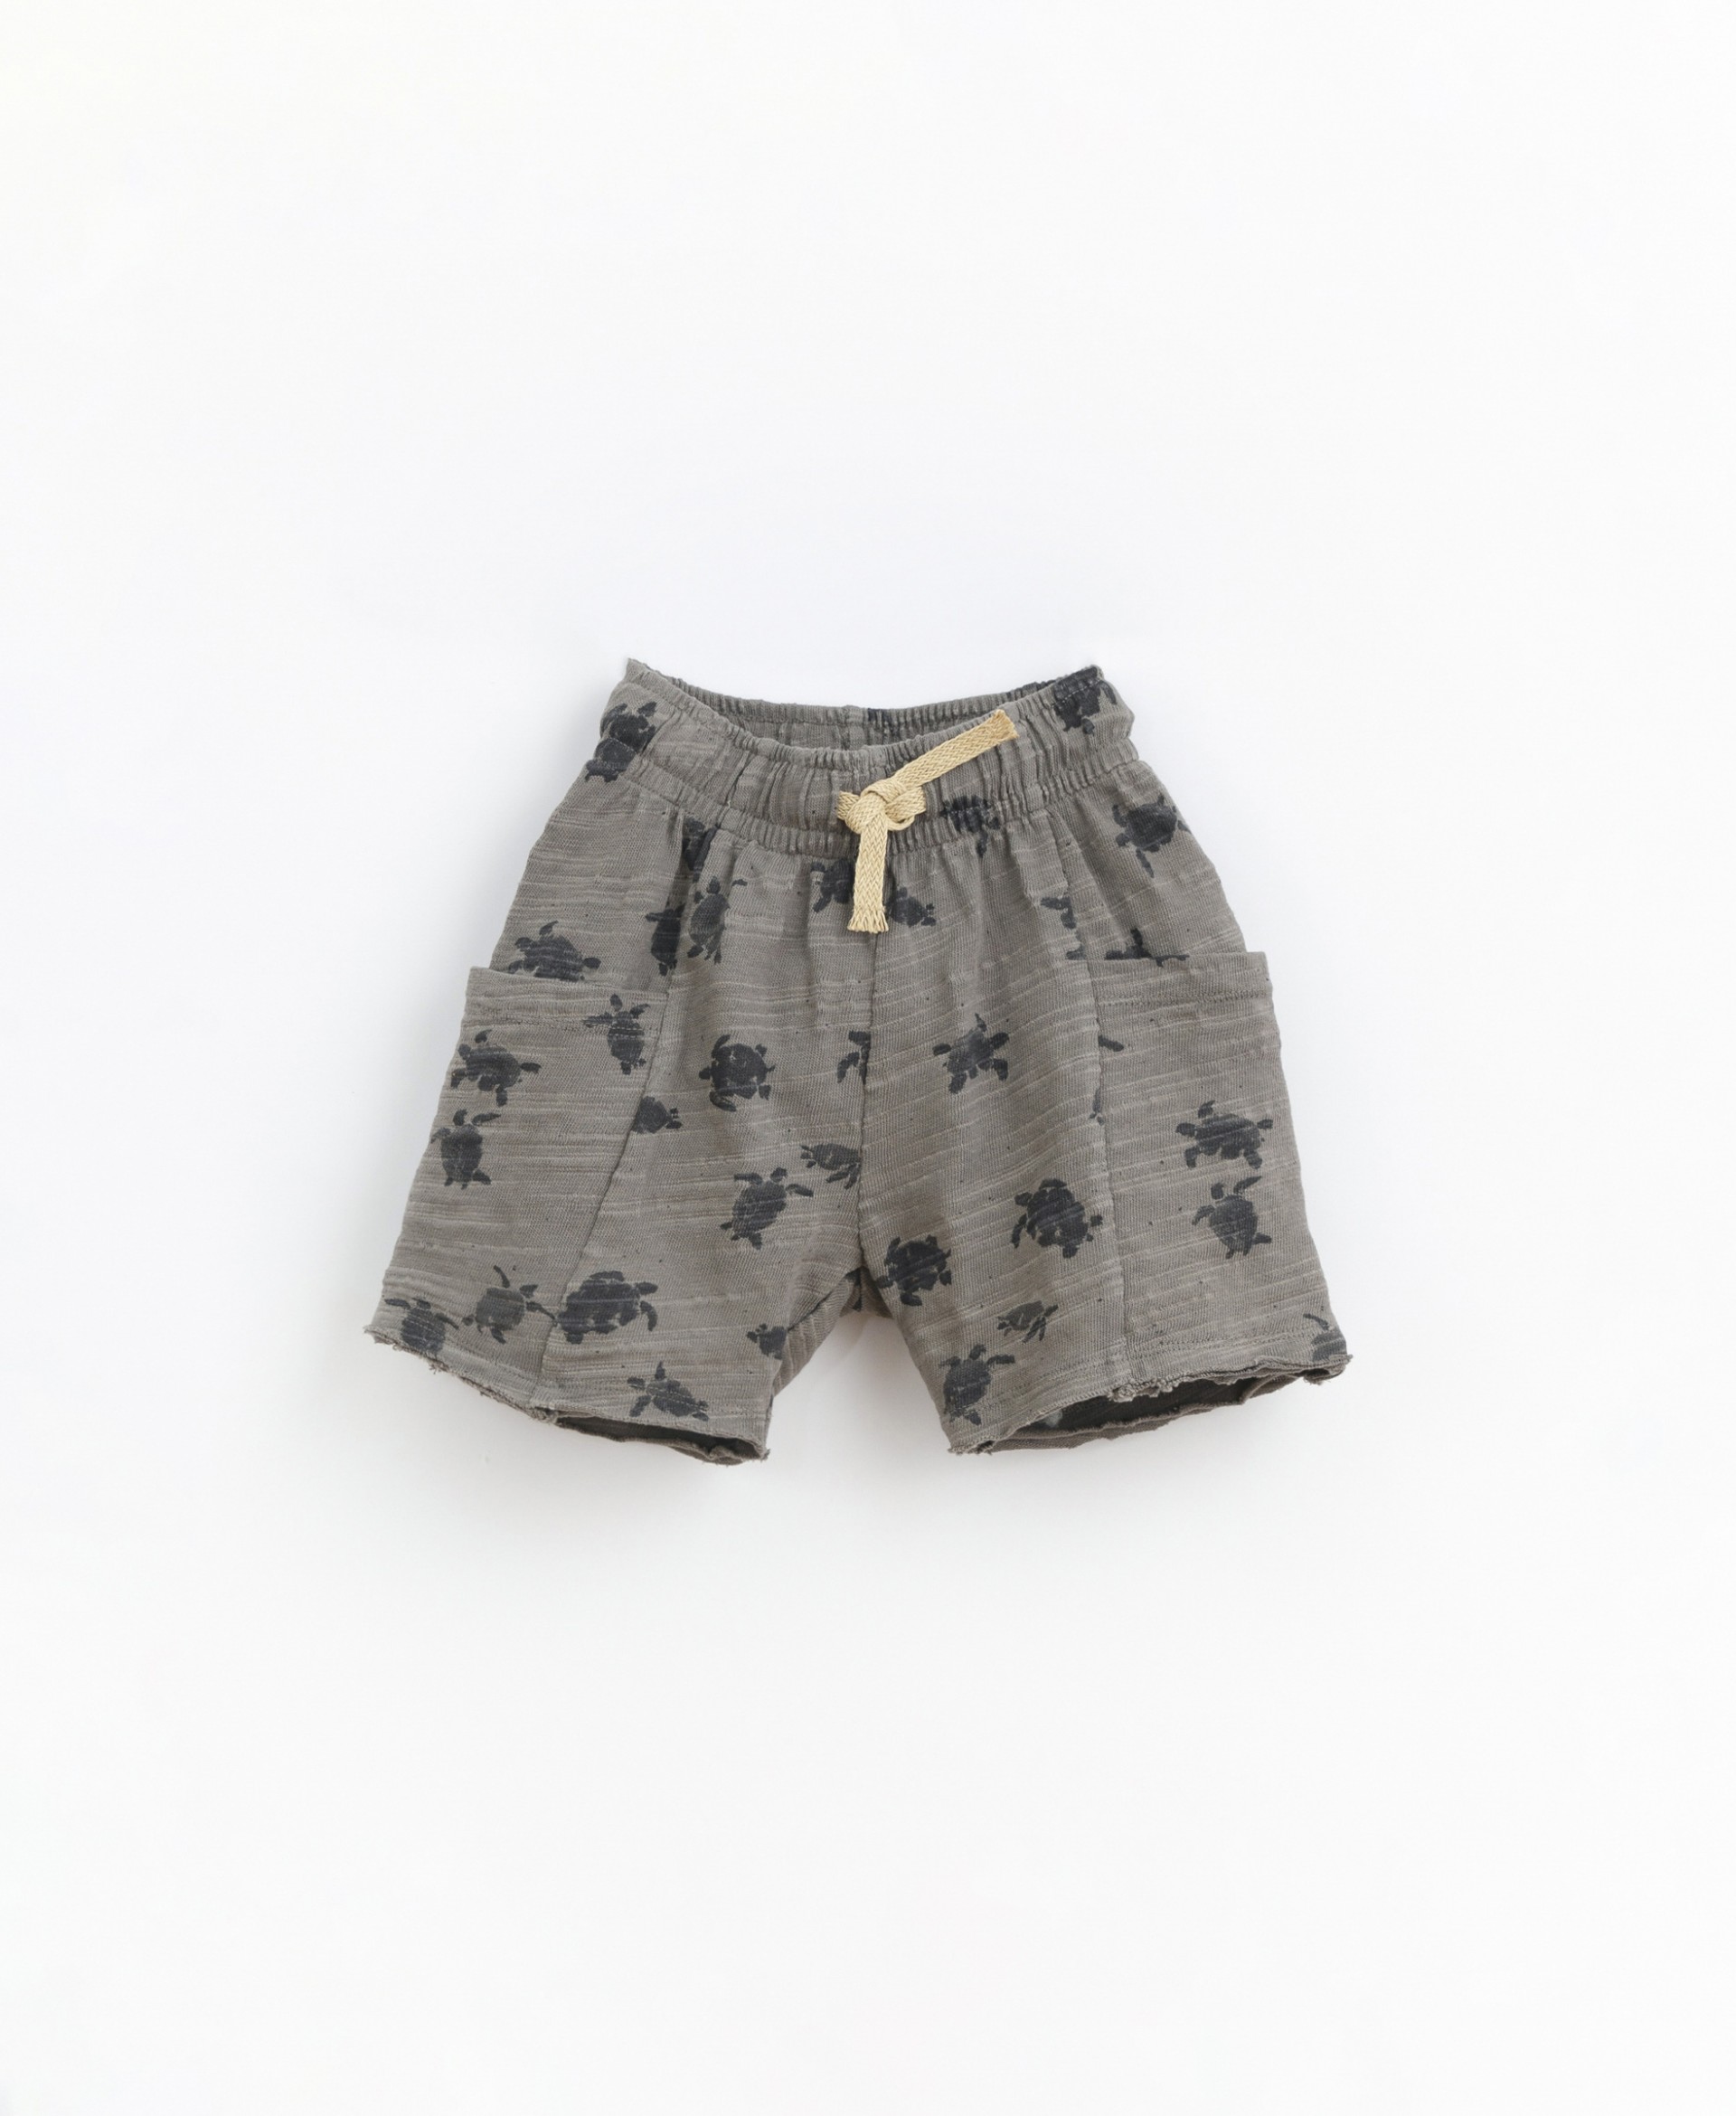 Jersey shorts with side pockets | Basketry